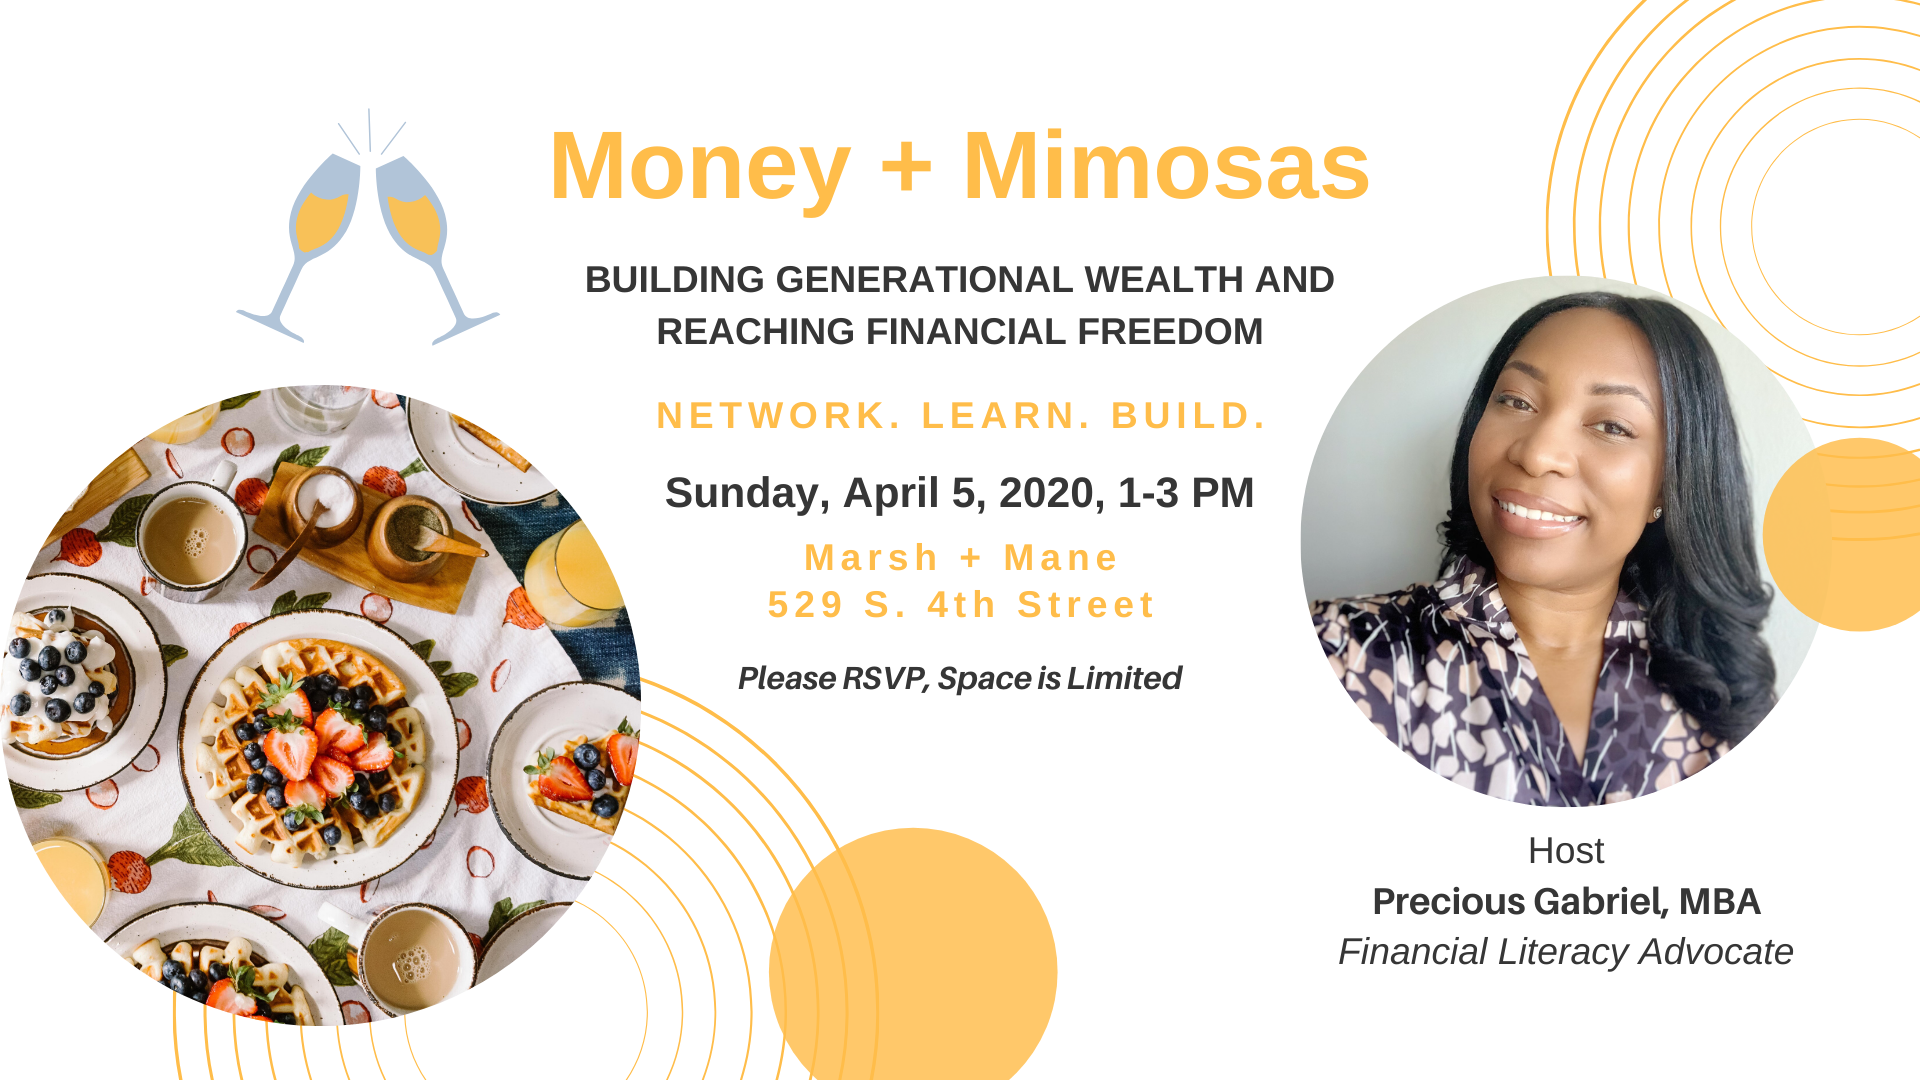 [POSTPONED] Money + Mimosas: Building Generational Wealth and Reaching Financial Freedom